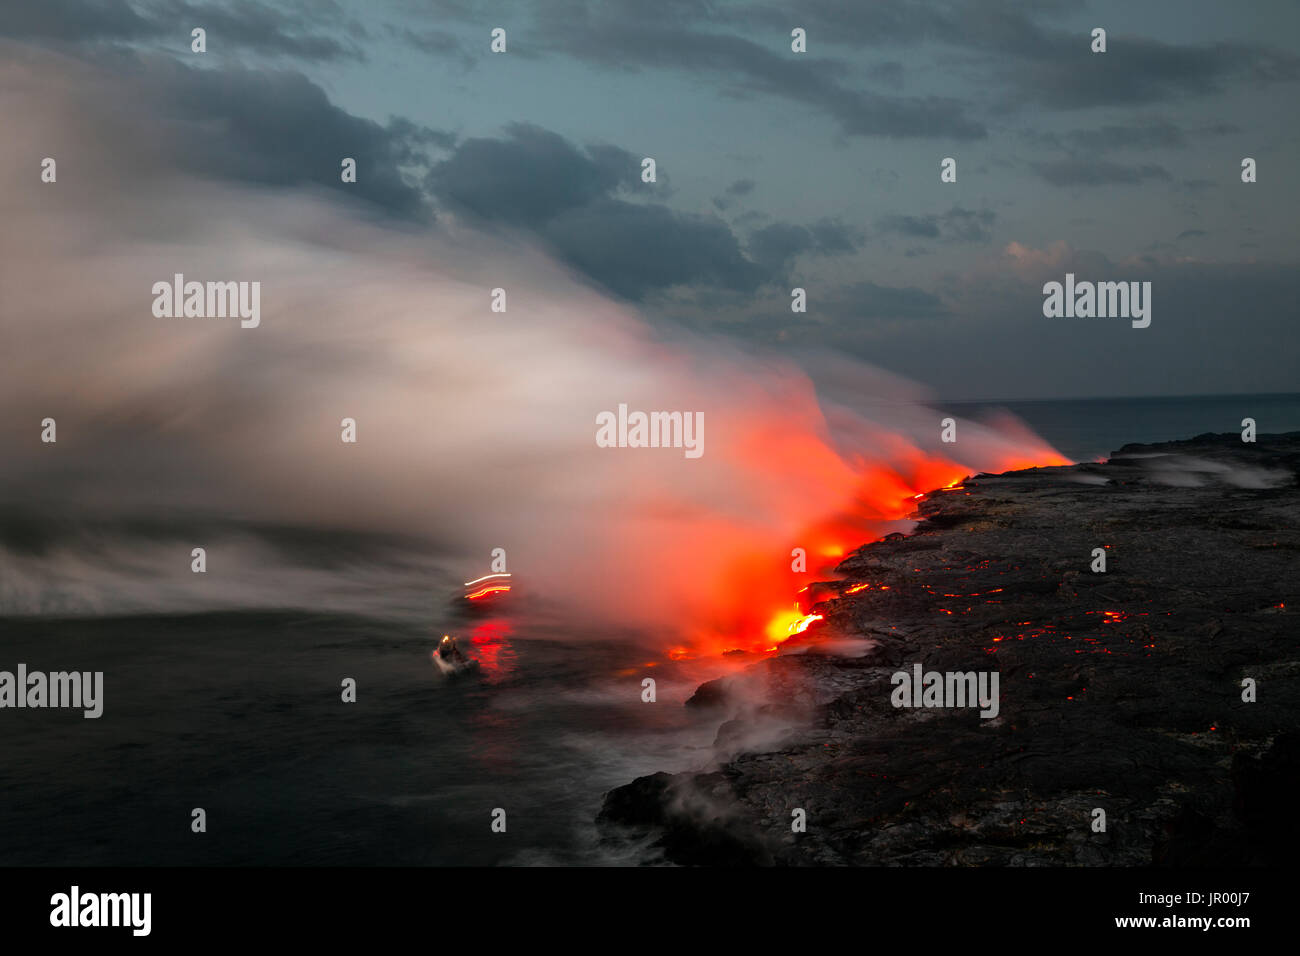 HI00335-00...HAWAI'I - Lava flowing into the Pacific Ocean from the East Riff Zoneof the Kilauea Volcano on the Island of Hawai'i. Stock Photo